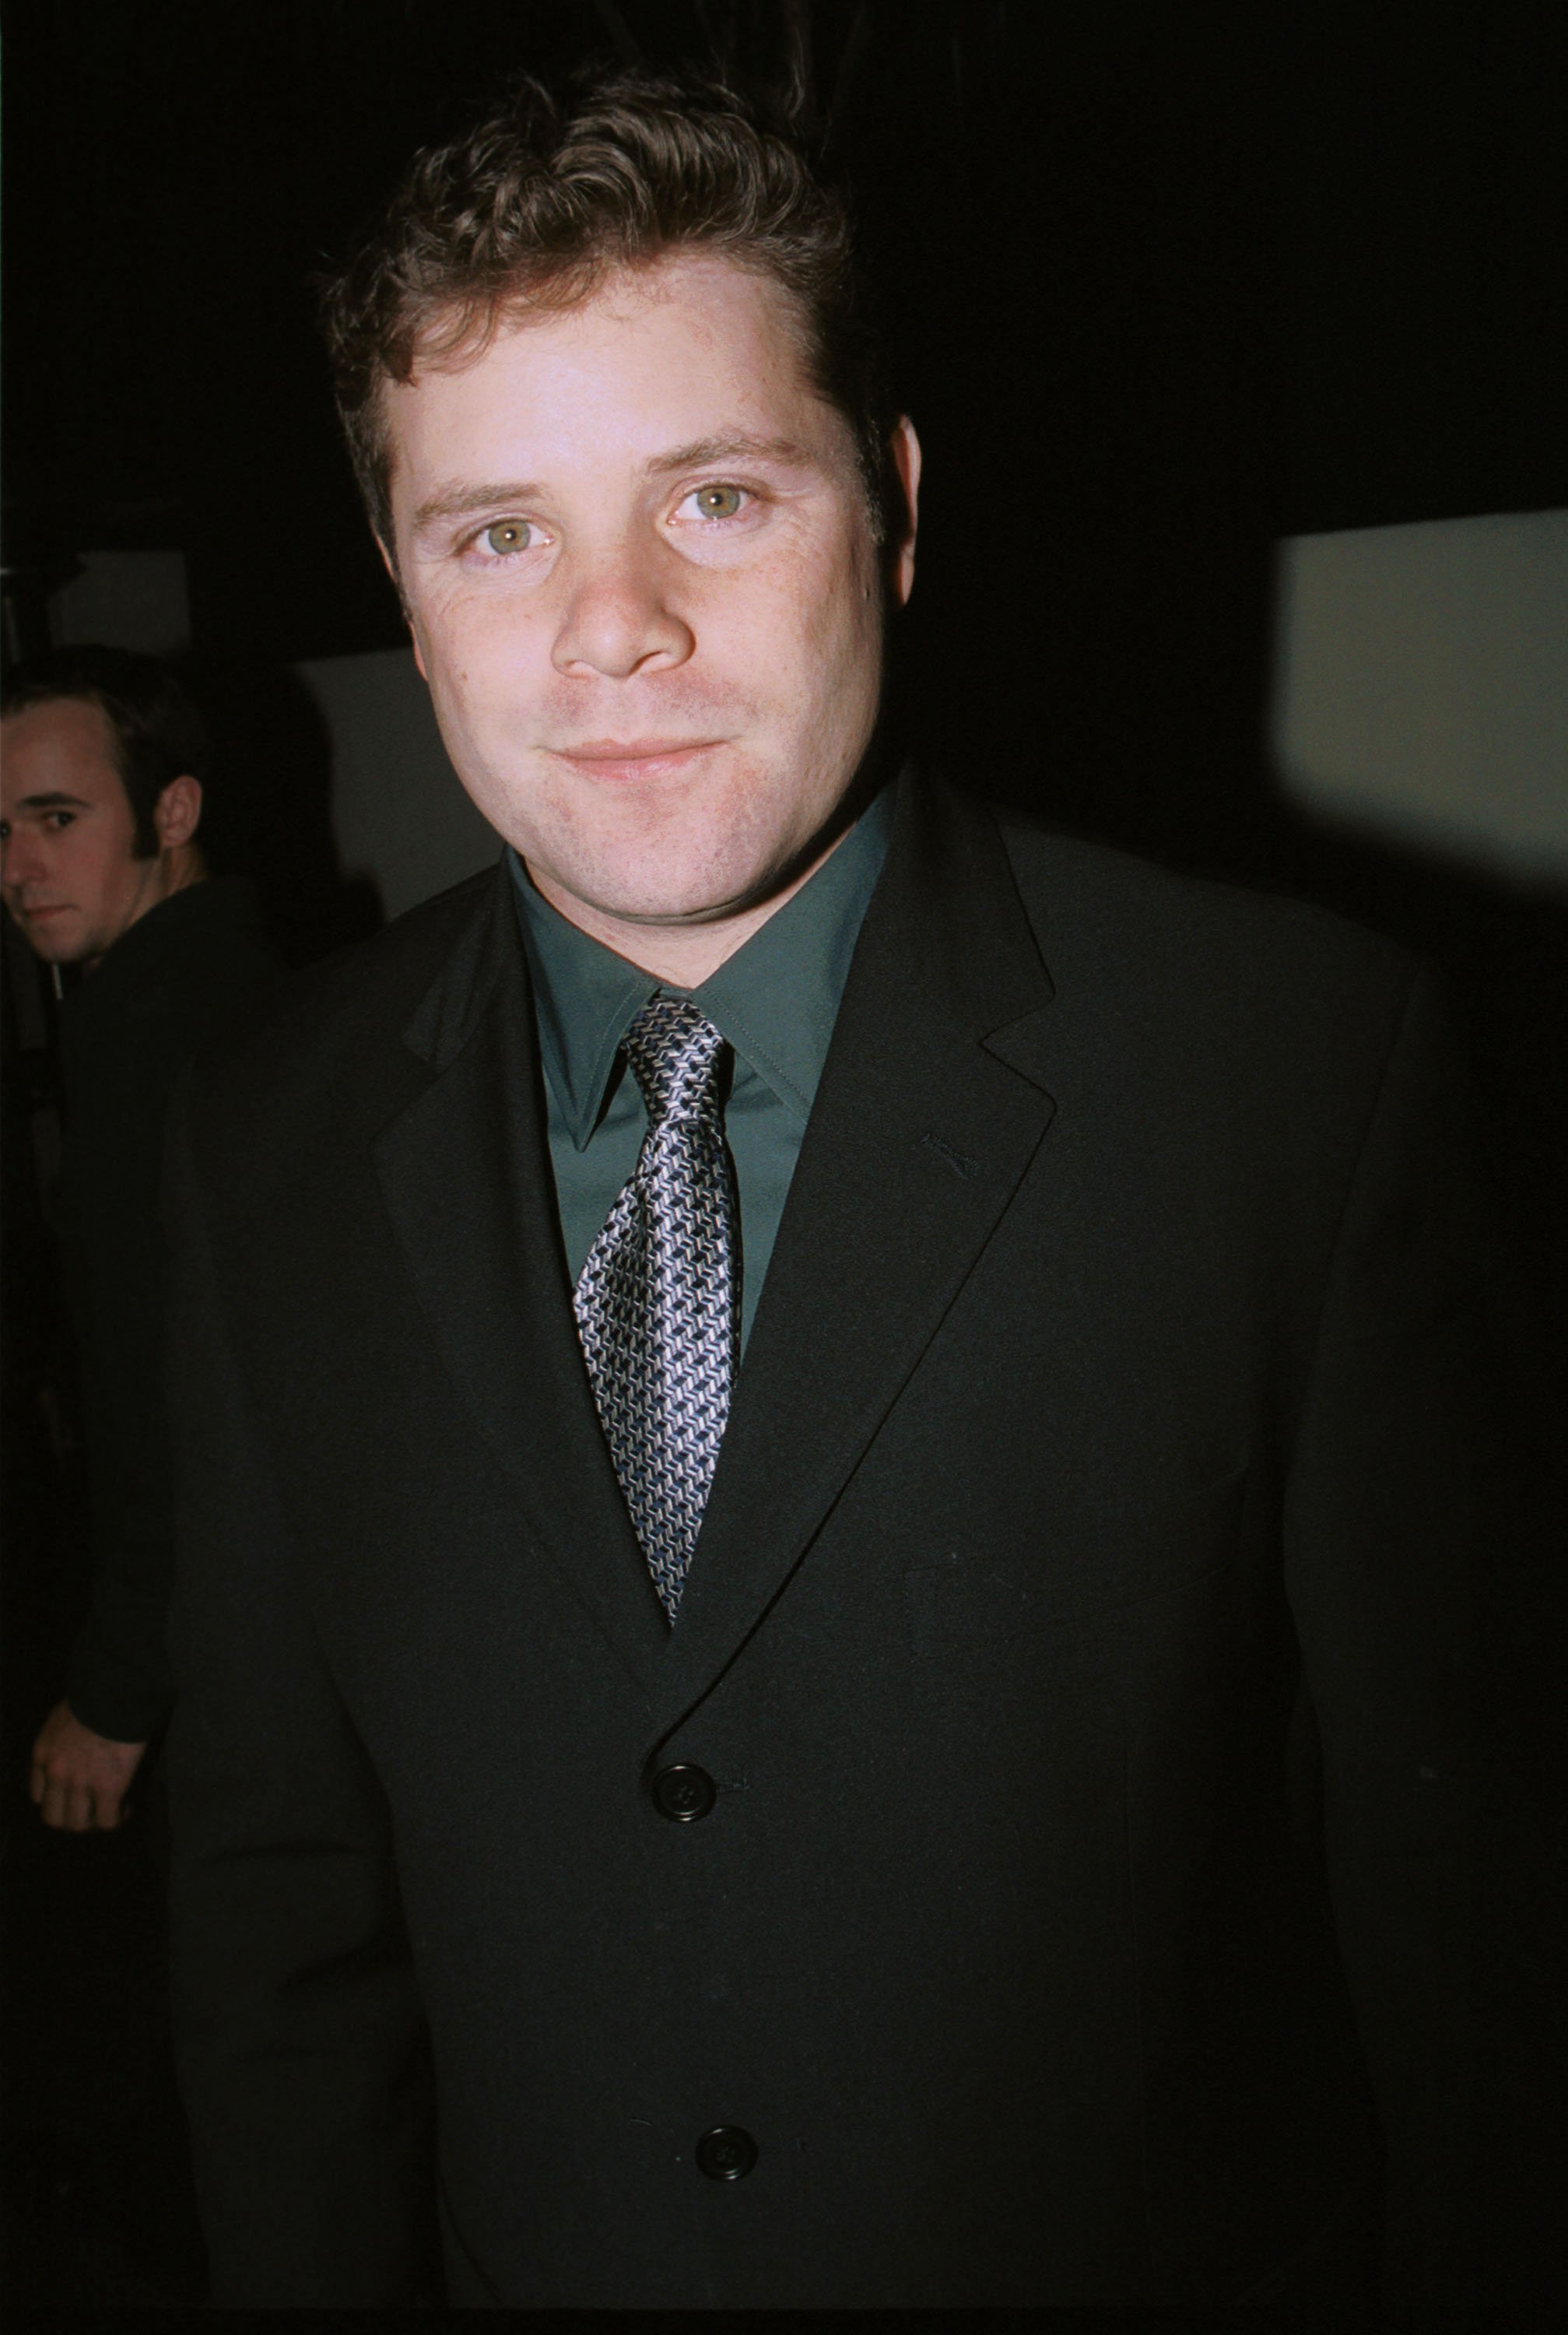 Sean Astin on December 16, 2001 in Hollywood, California | Source: Getty Images